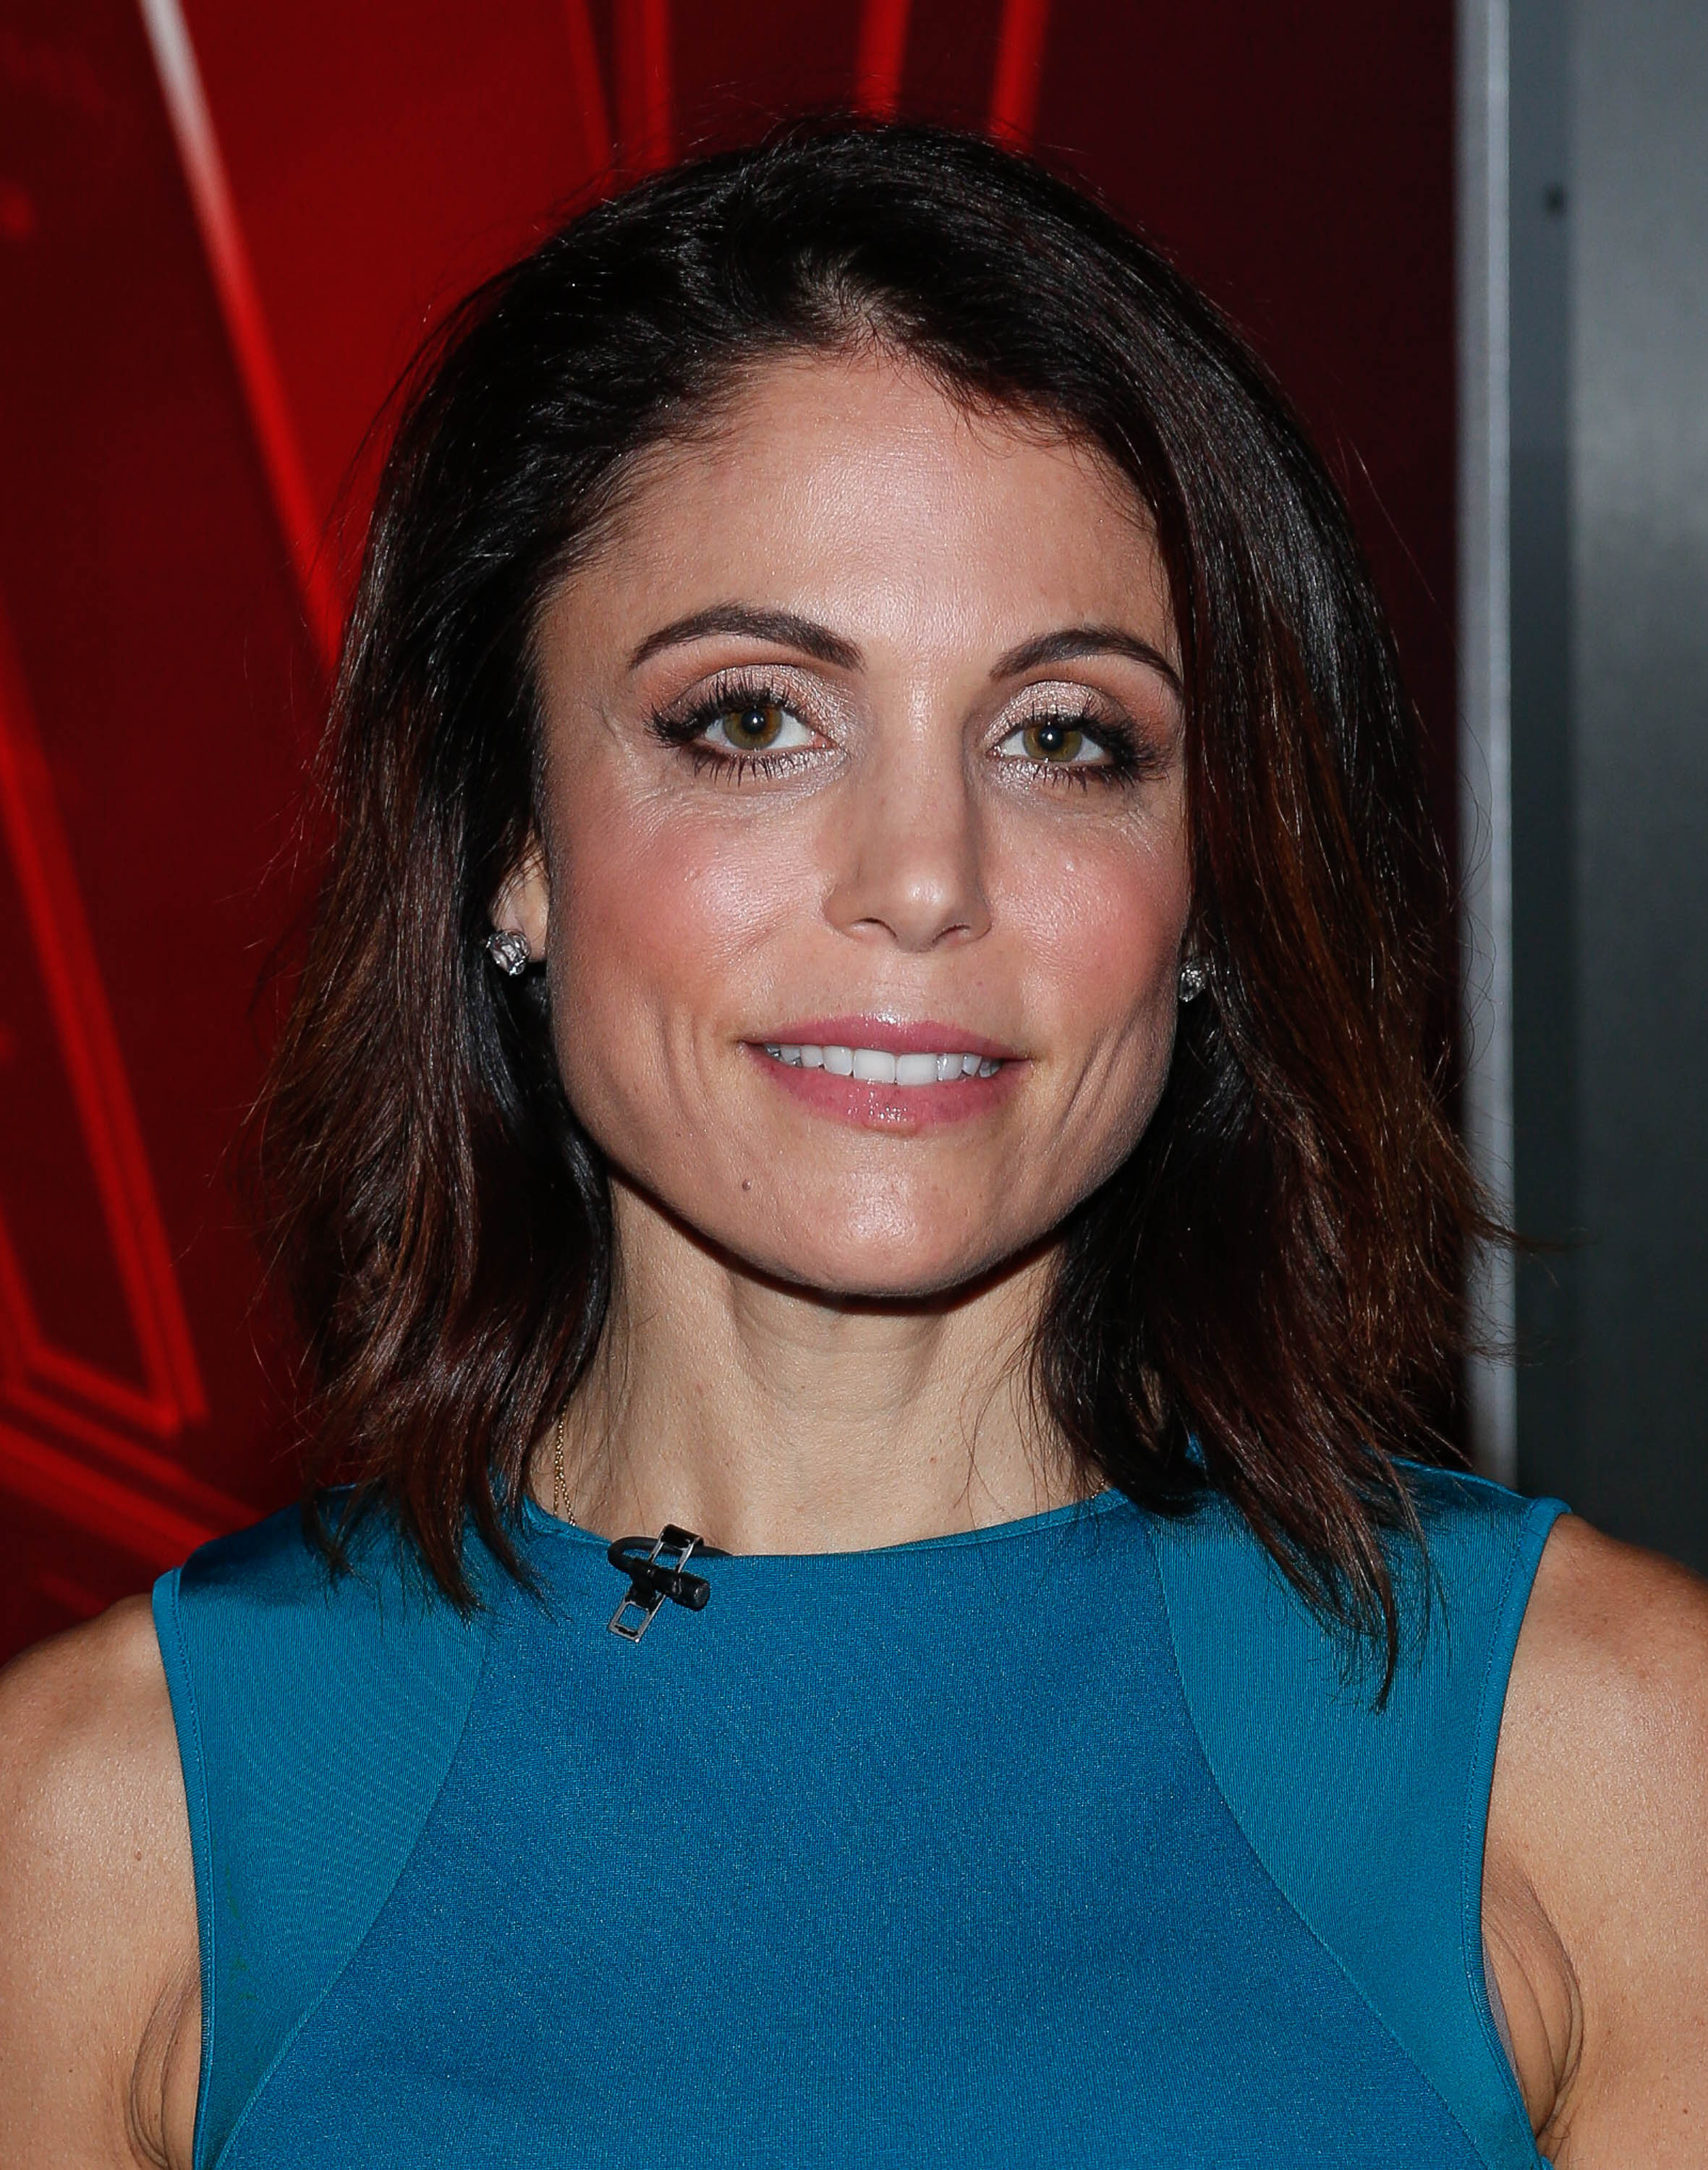 Bethenny Frankel Doesn't Look Like This Anymore.